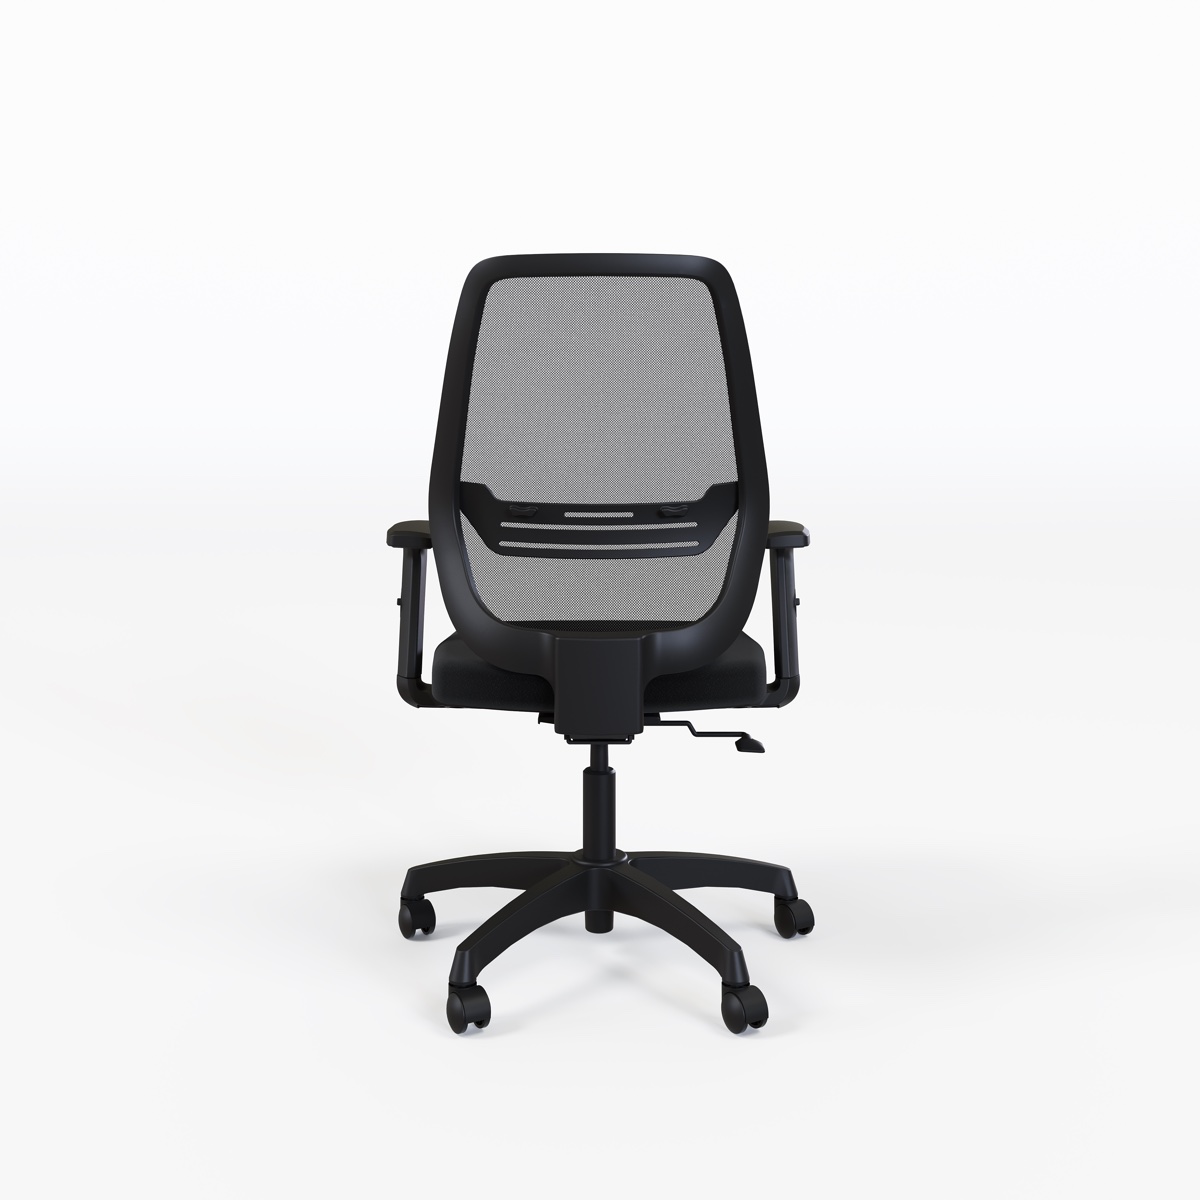 comfortable folding office chair